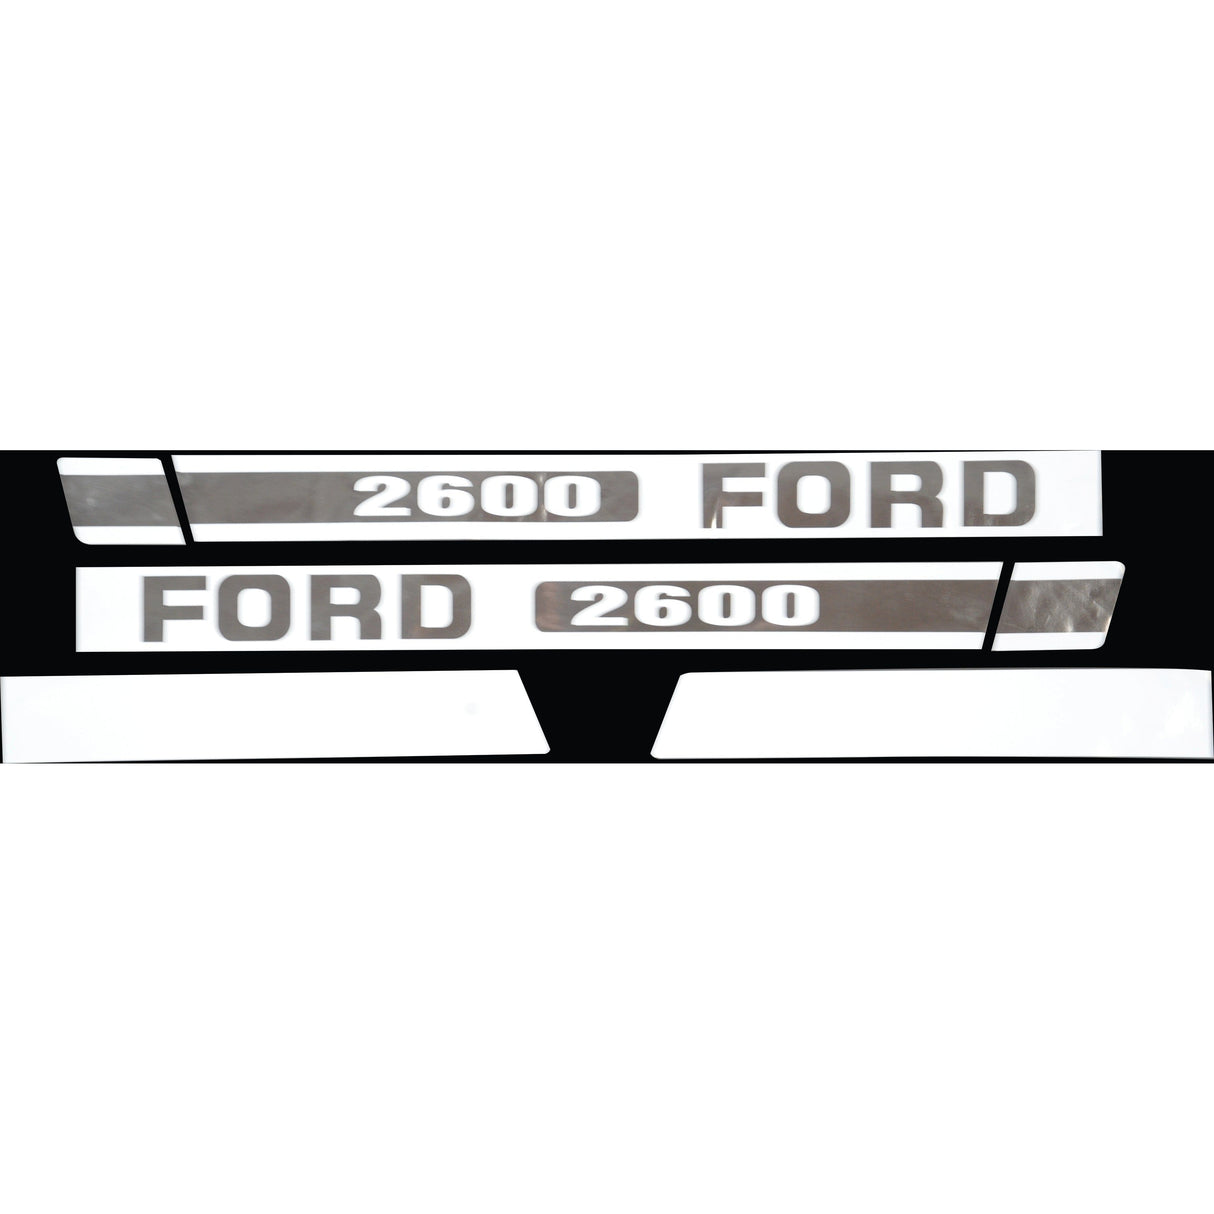 Decal Set - Ford / New Holland 2600
 - S.8414 - Farming Parts